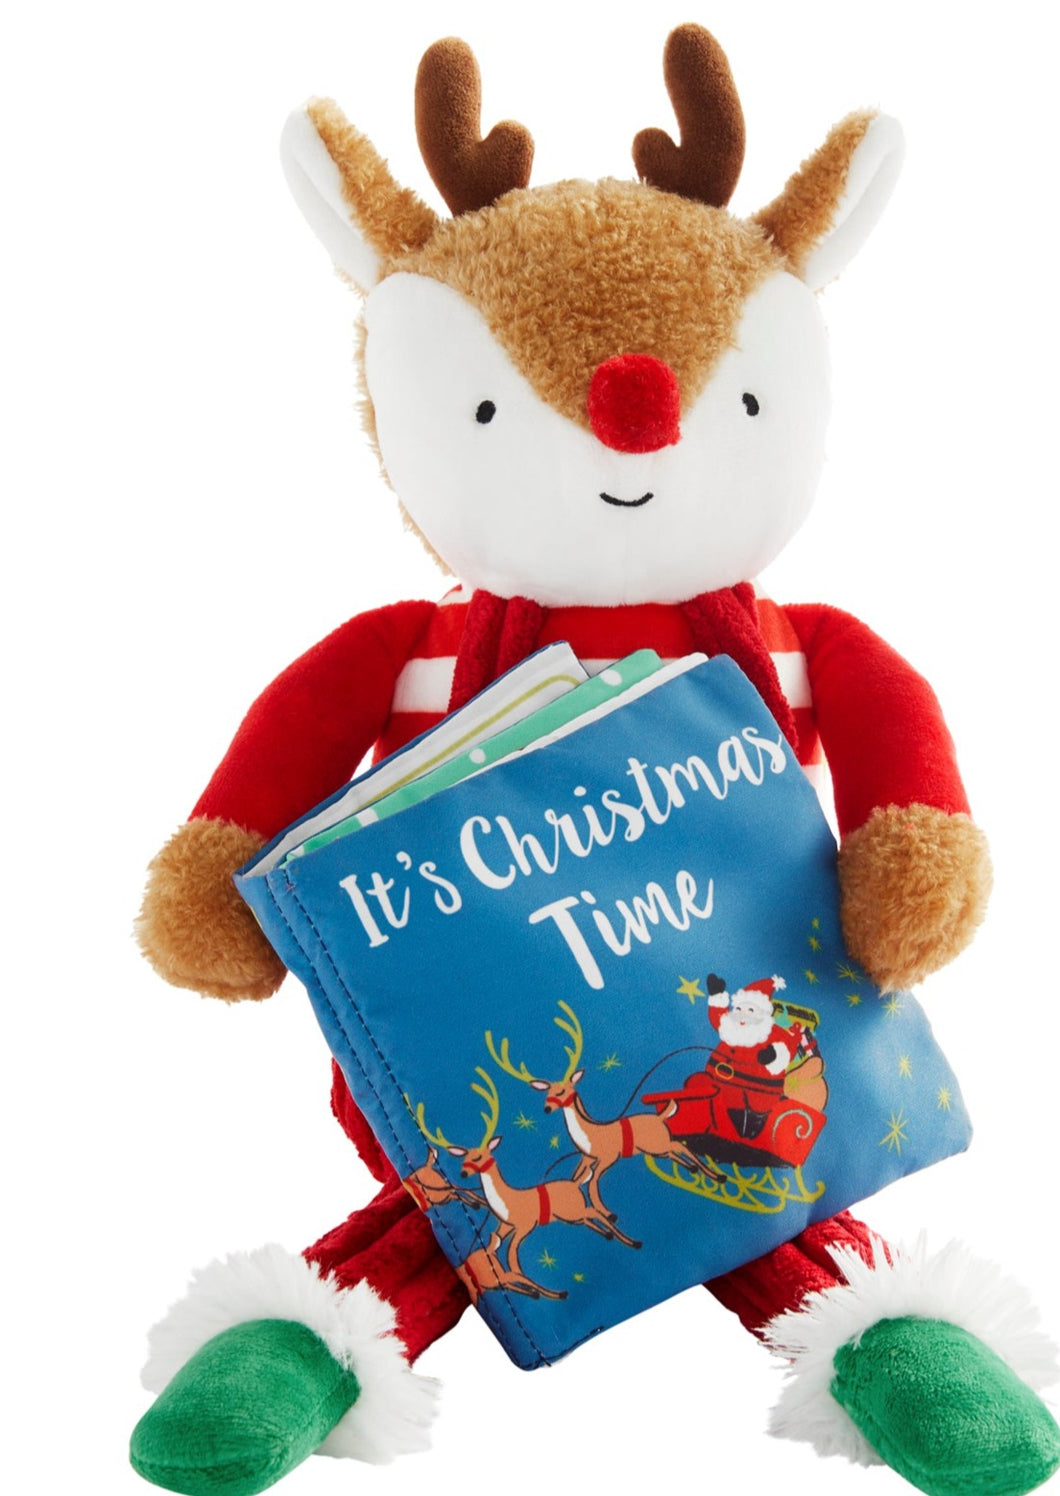 2-piece set. Plush holds soft book about the magic of Christmas.